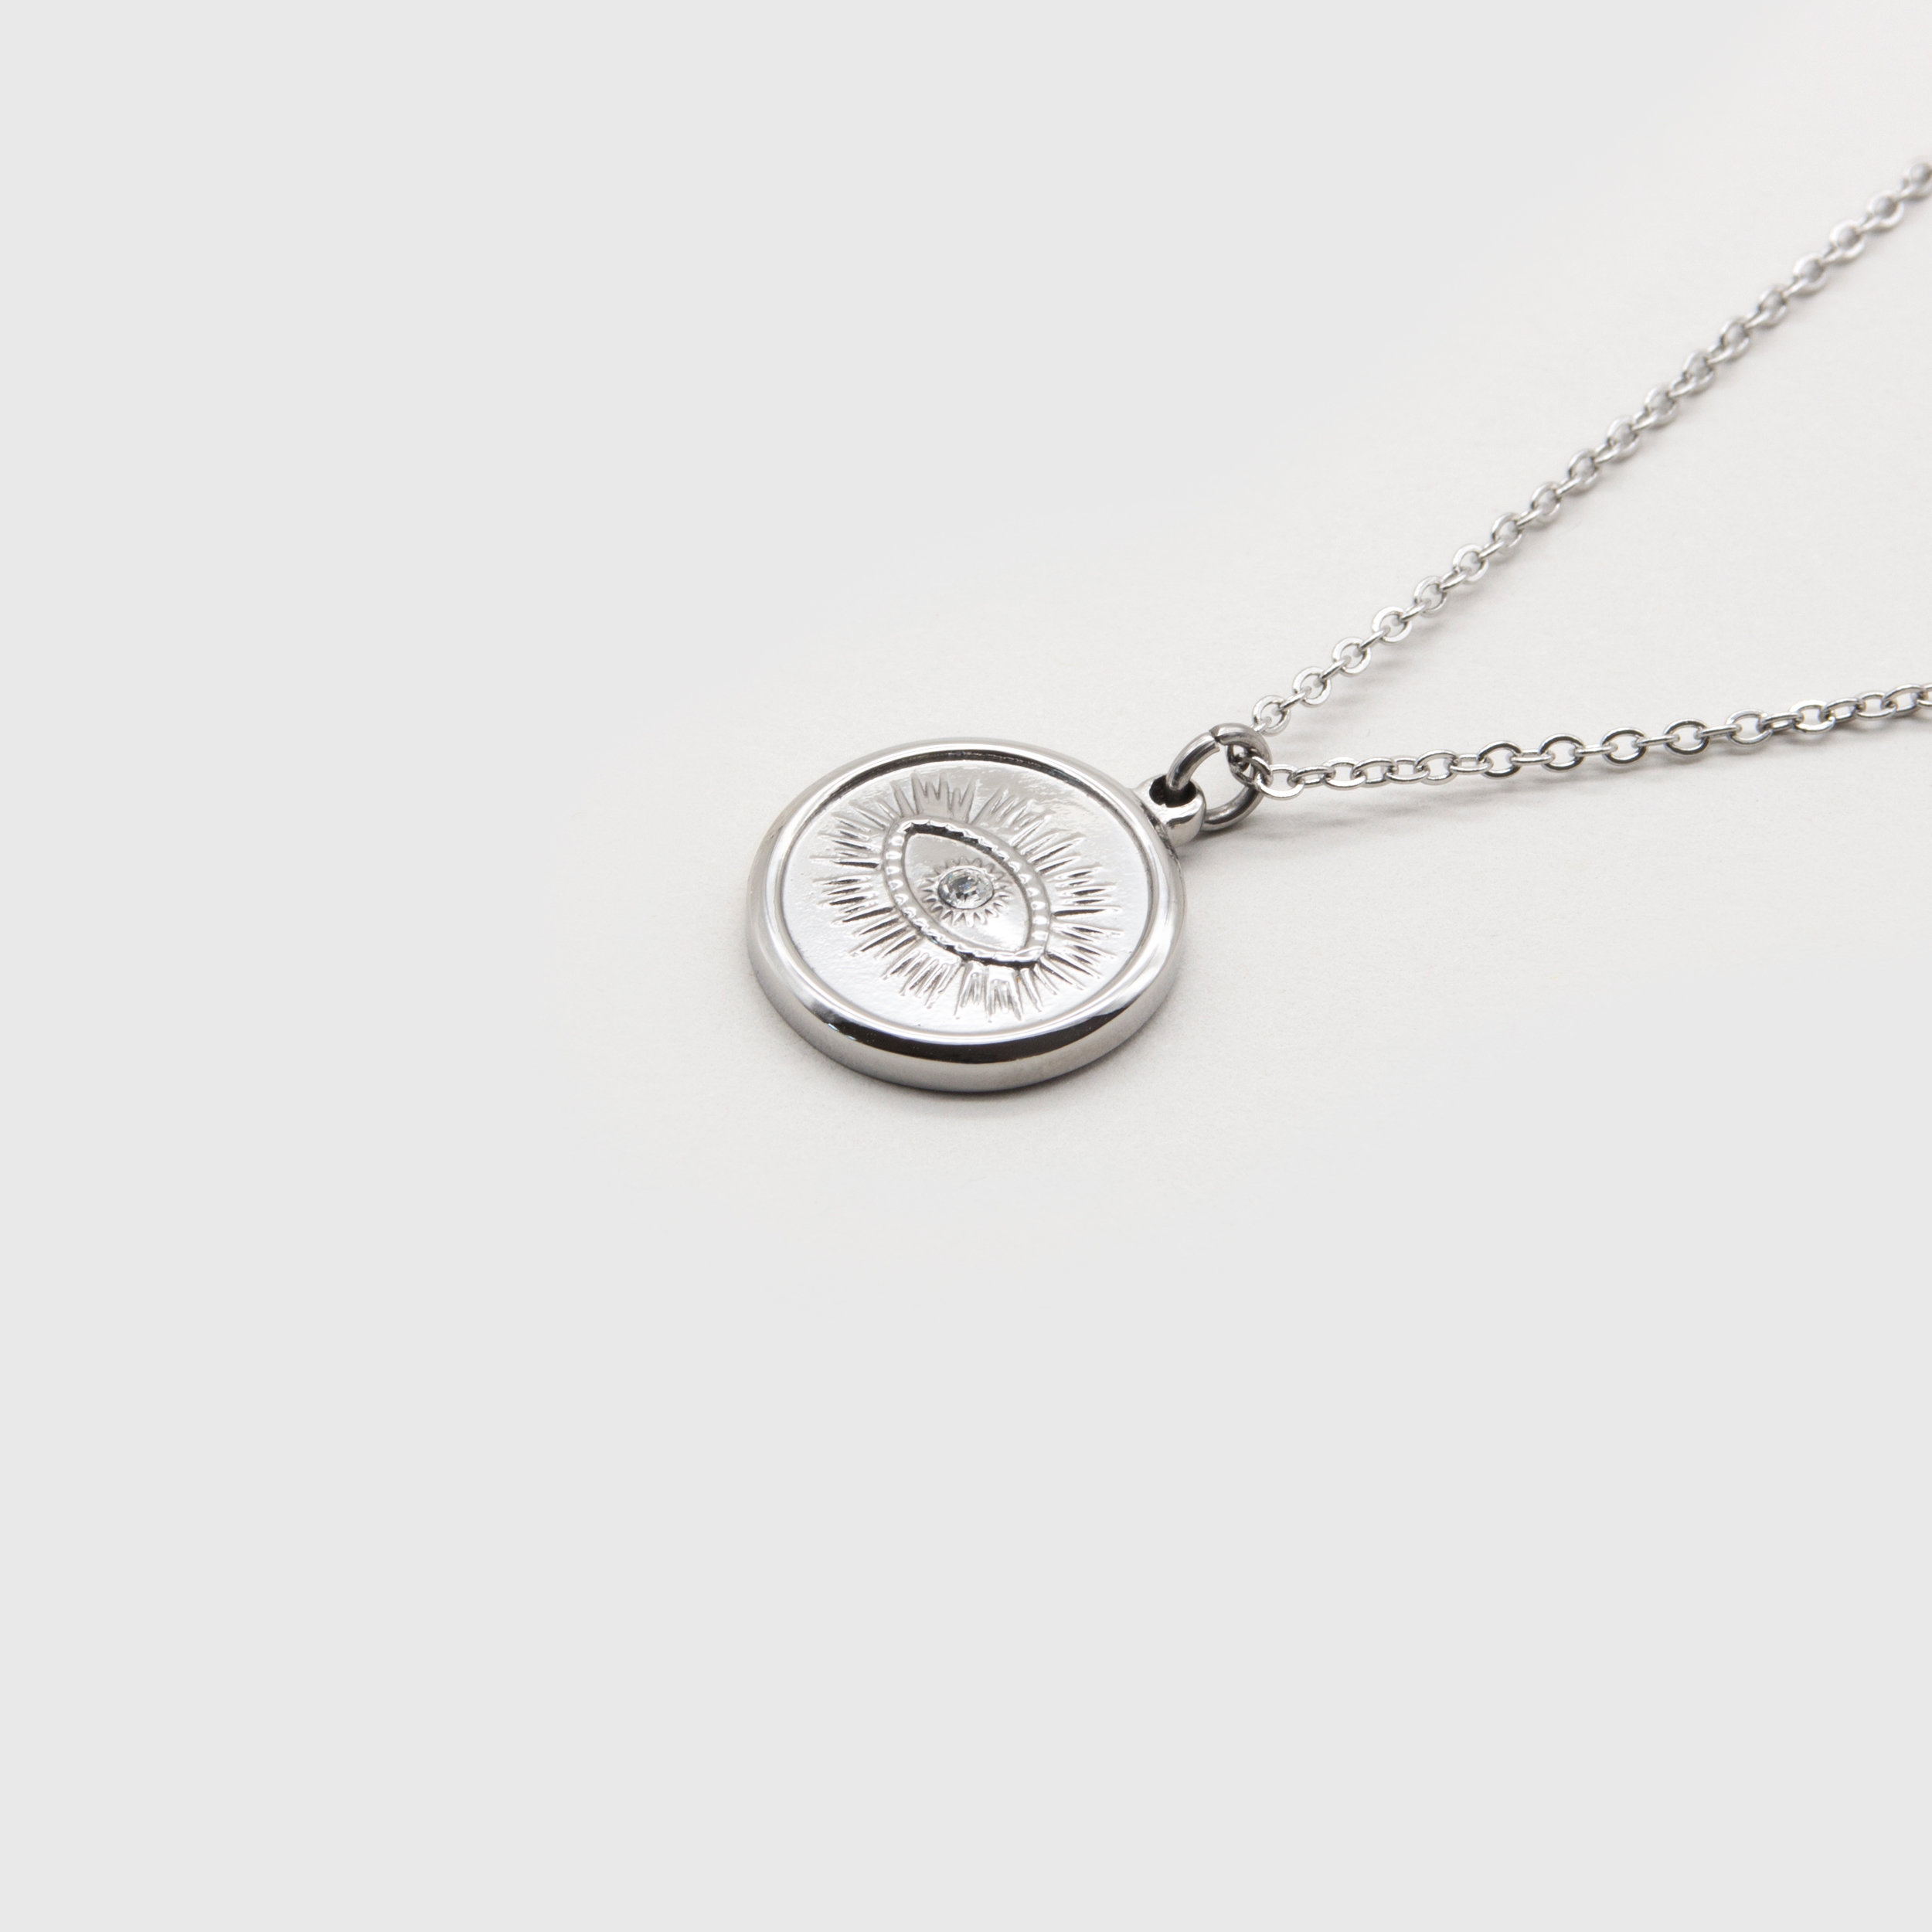 Kuku silver eye coin necklace with stone